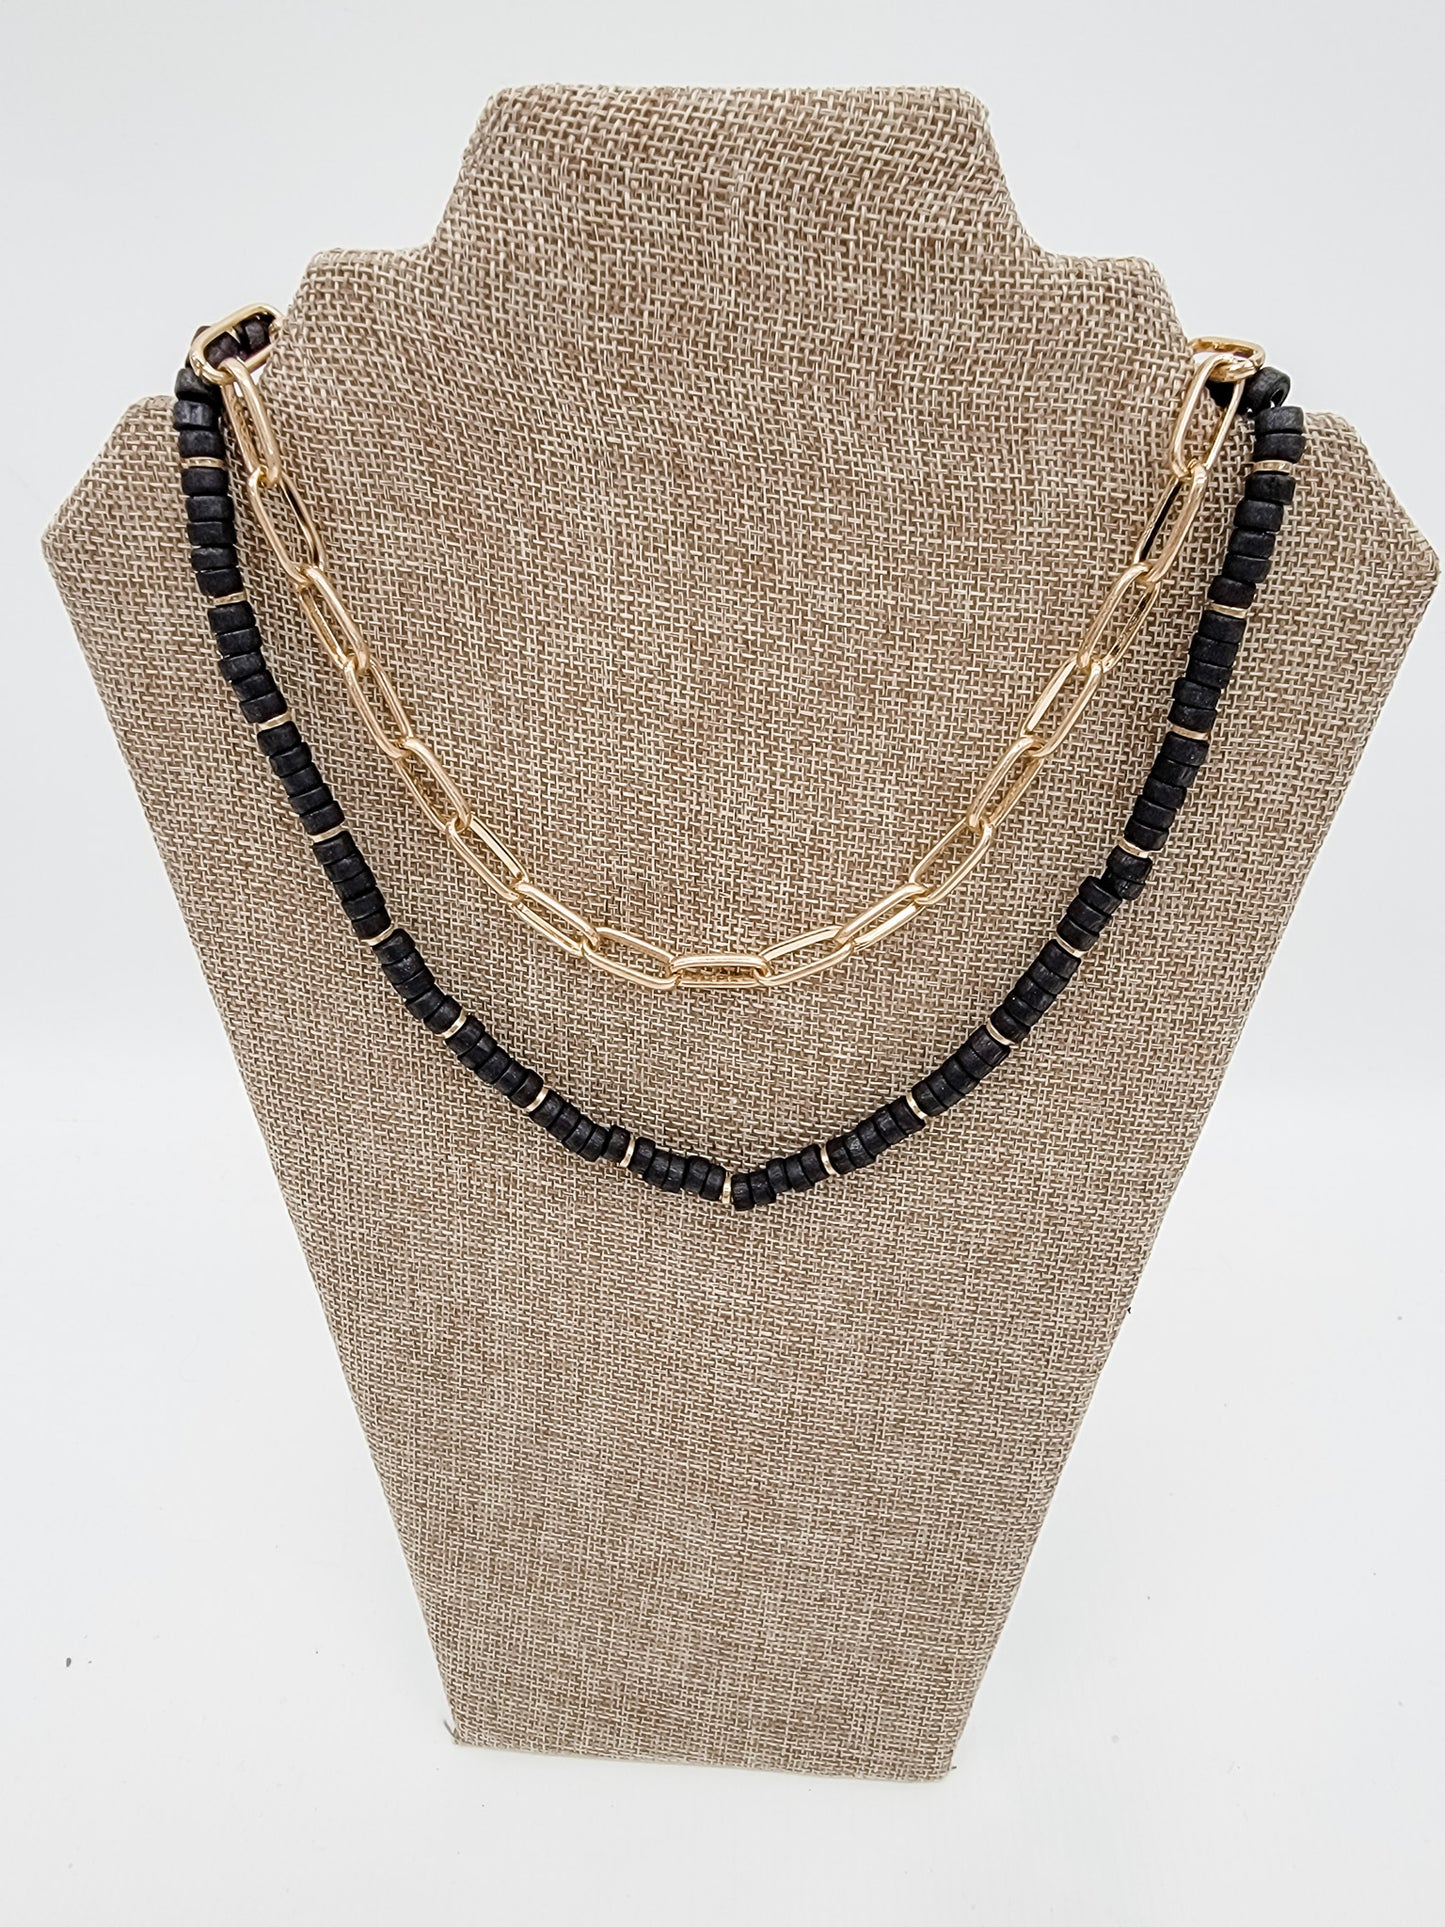 Black & Gold Multi-Chain Necklaces - Variety